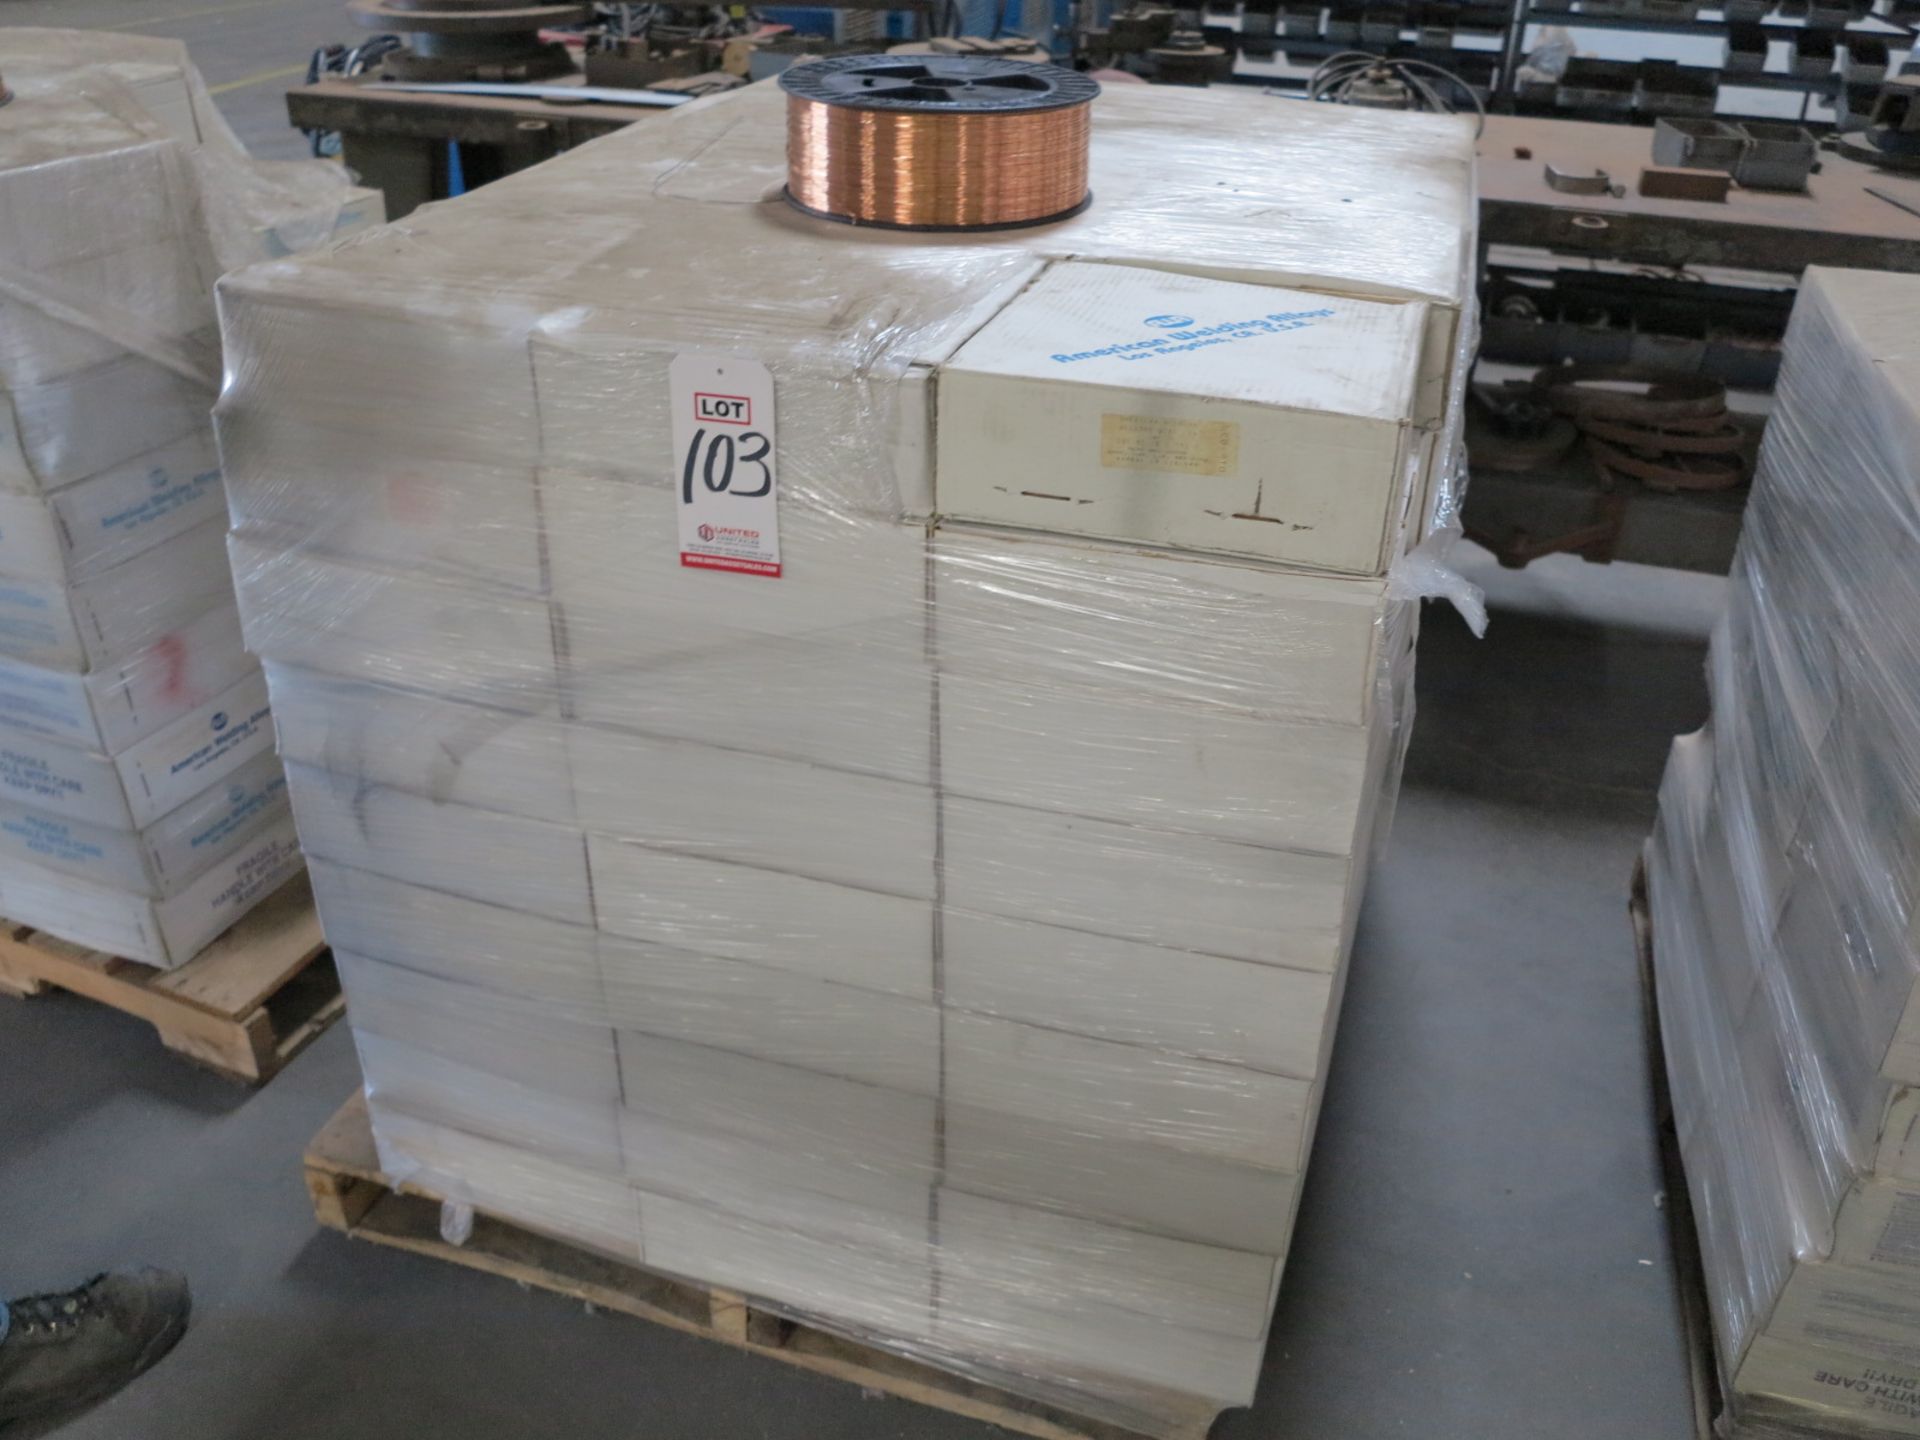 LOT - PALLET OF AMERICAN WELDING WIRE, S6, DIA. .035", 81 BOXES